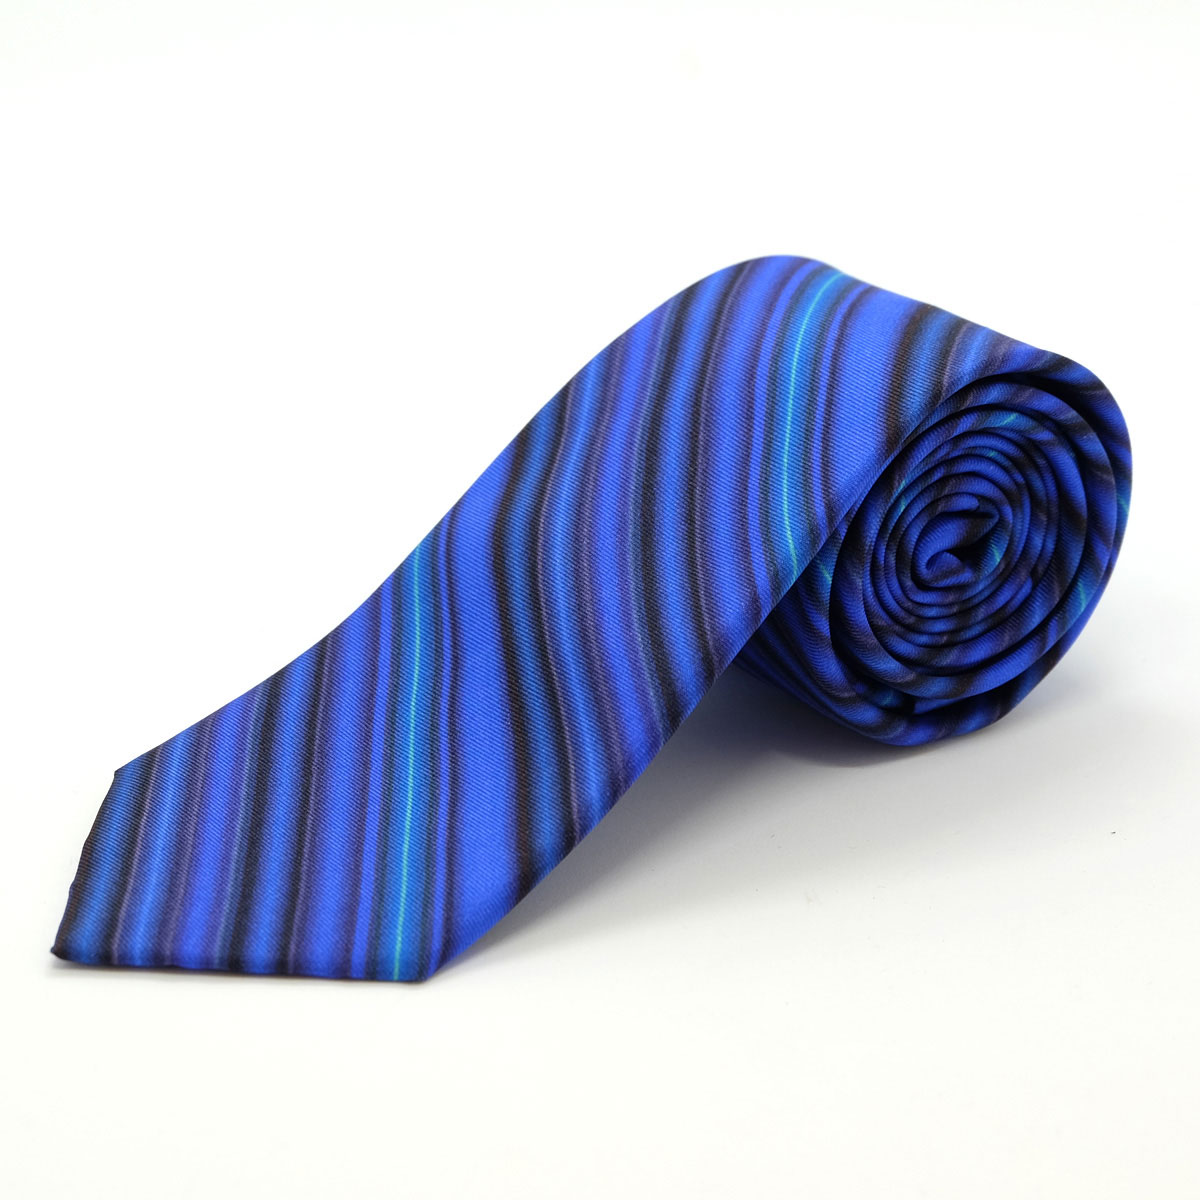 Mixed Stripe Blue Tie - The Chap